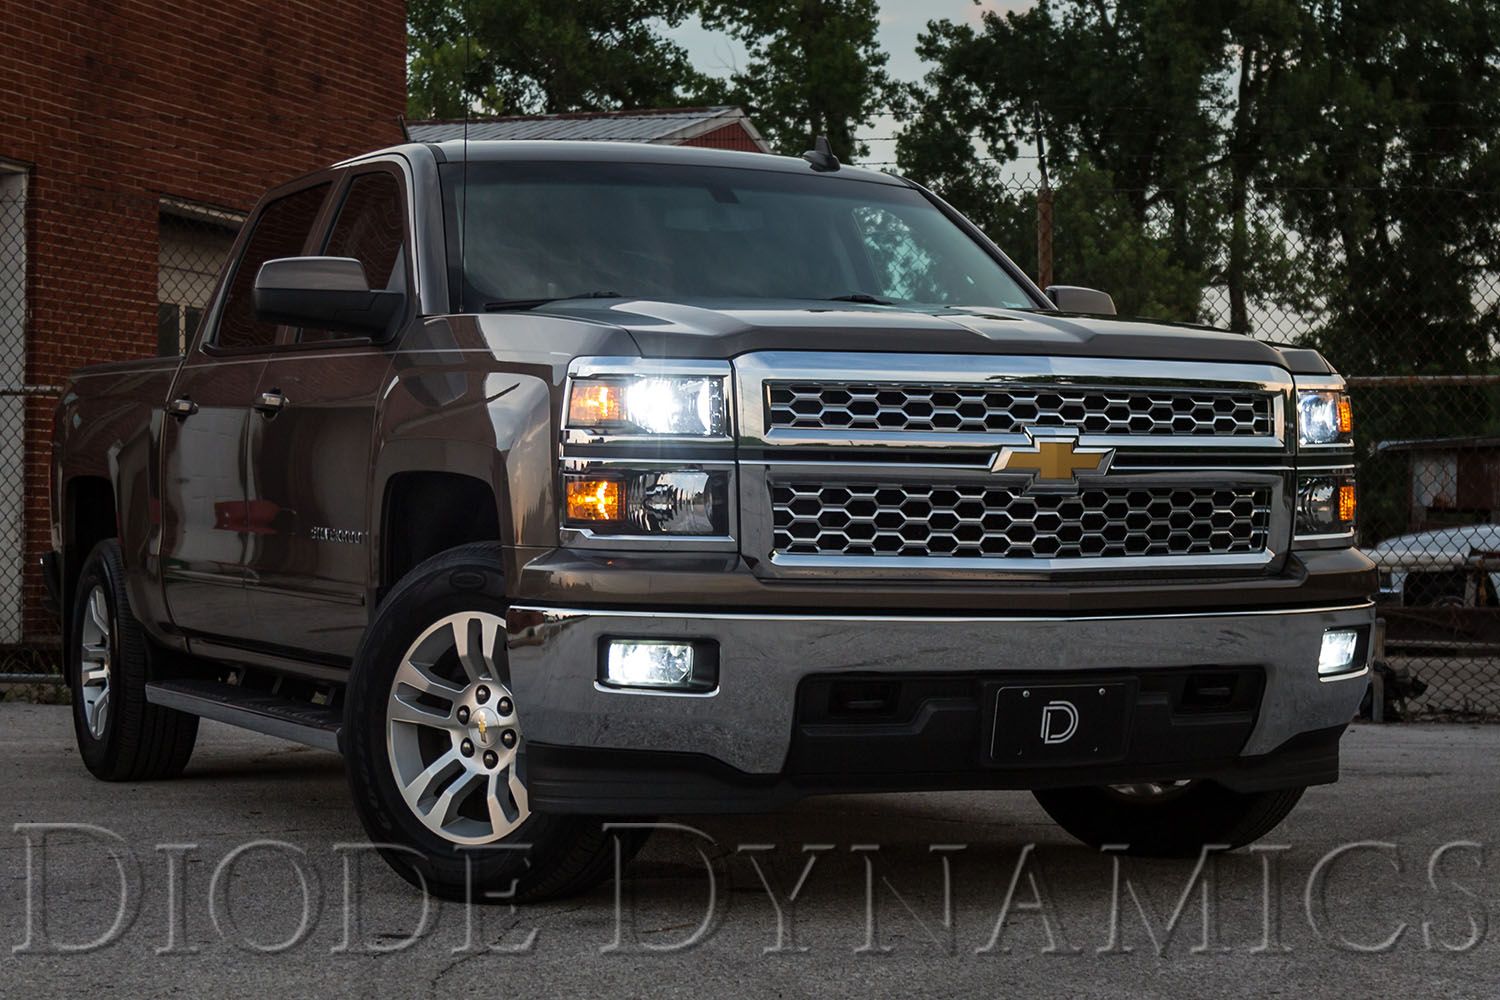 Top LED Lighting Upgrades for the 2007-2015 Chevrolet Silverado 